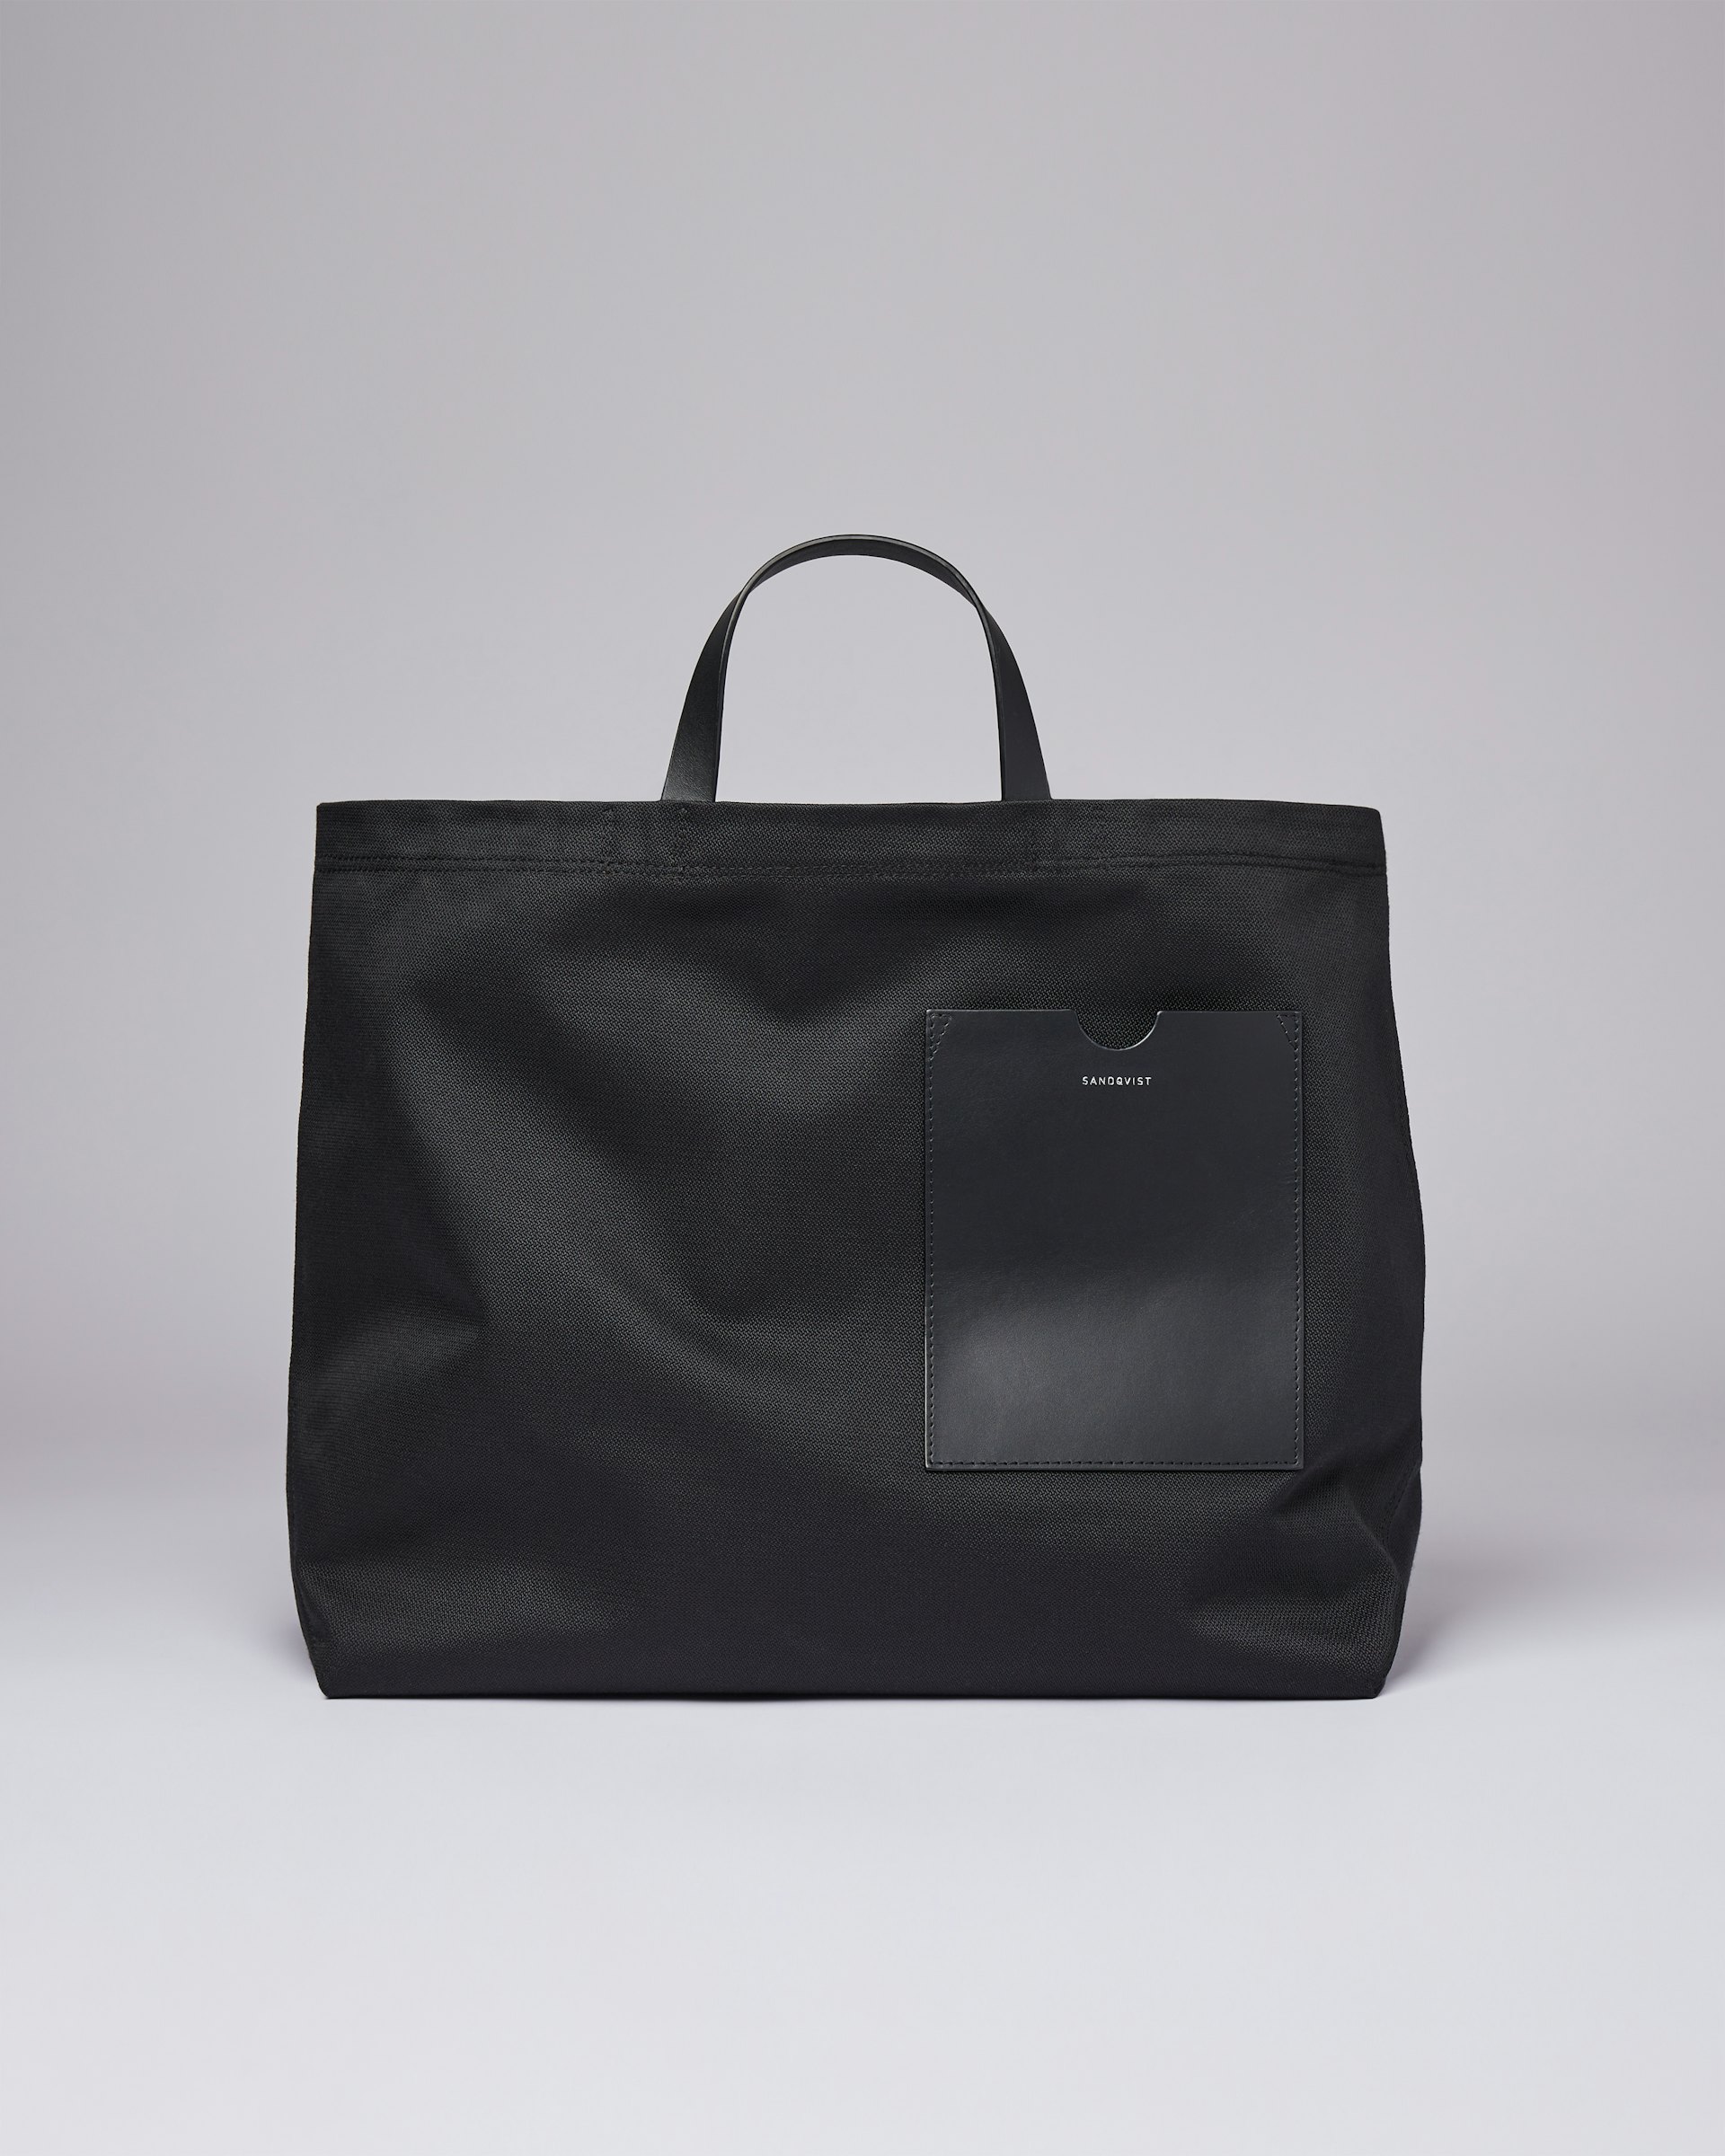 Agnes belongs to the category Tote bags and is in color black (1 of 7)